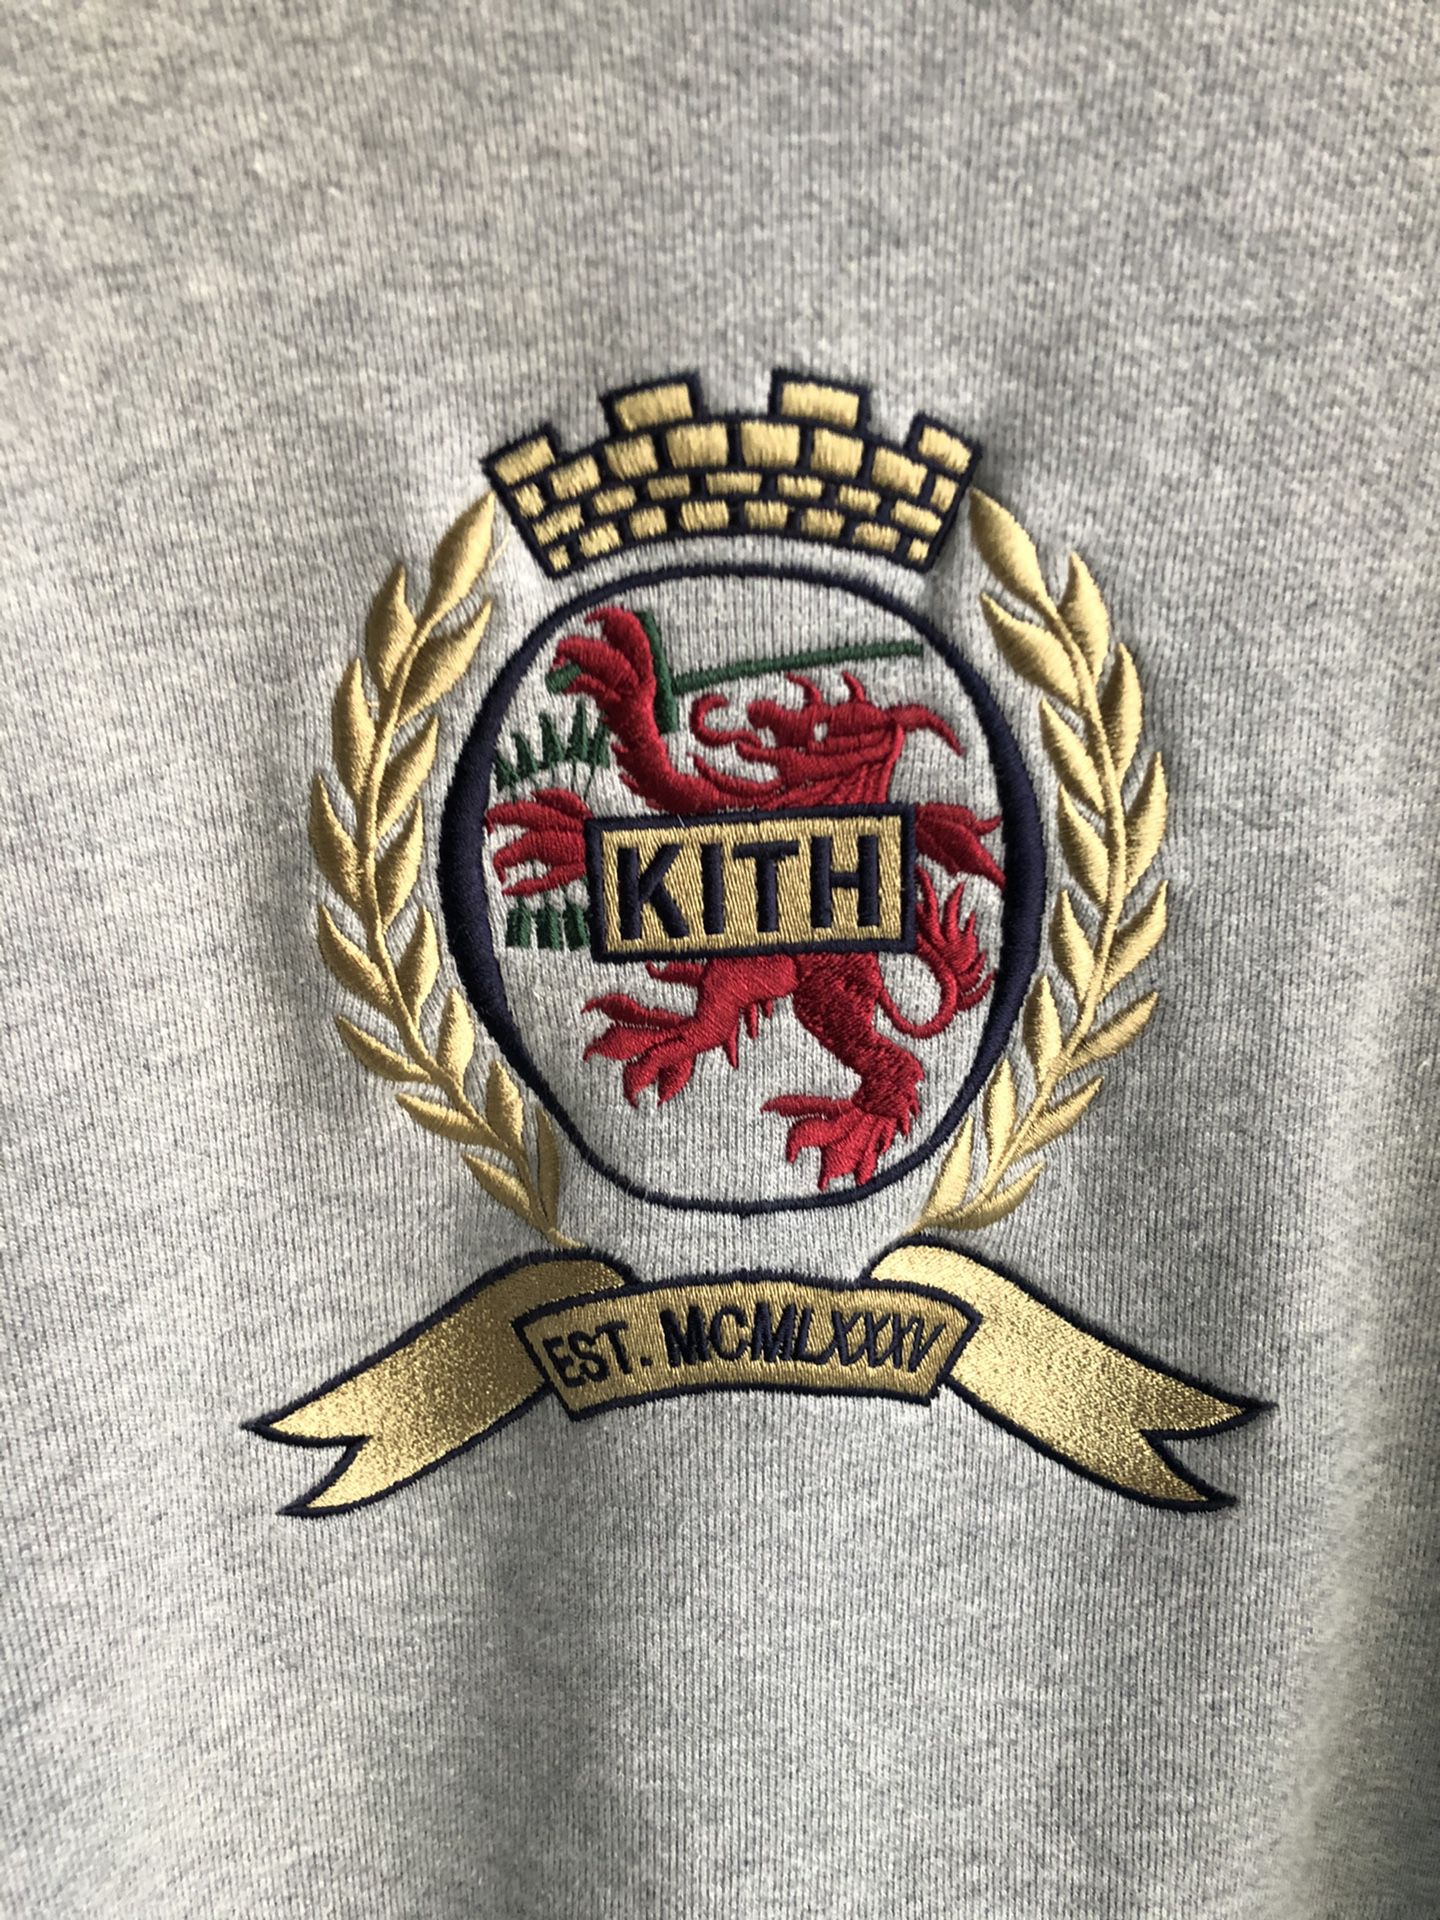 Kith x Tommy Hillfiger (Size Large)